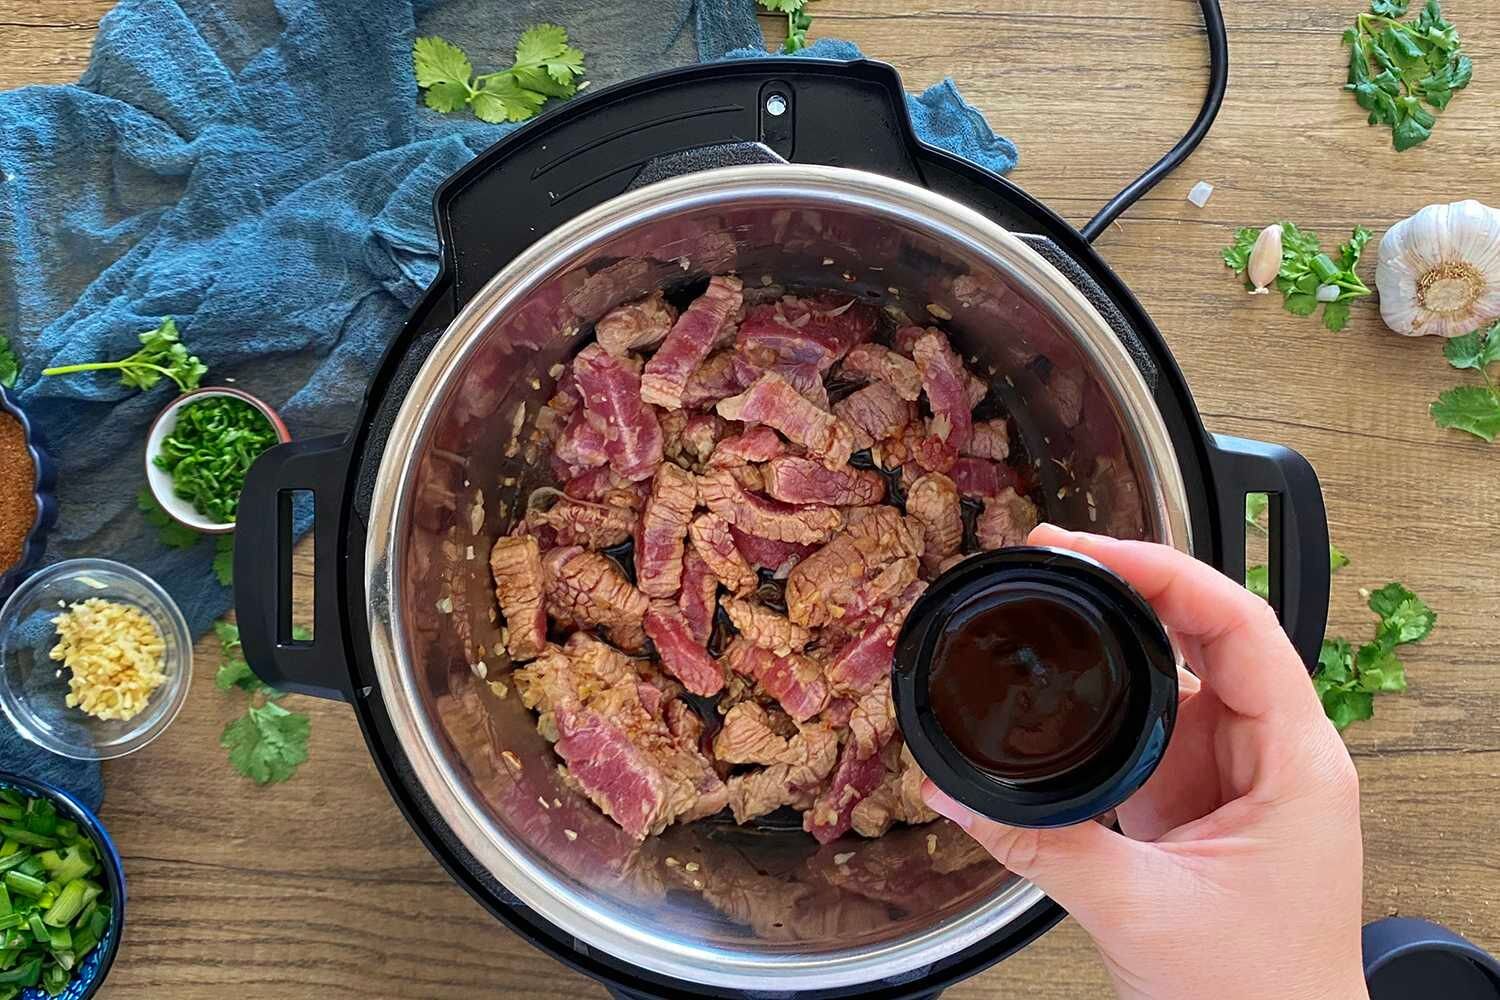 How To Brown Meat In An Electric Pressure Cooker